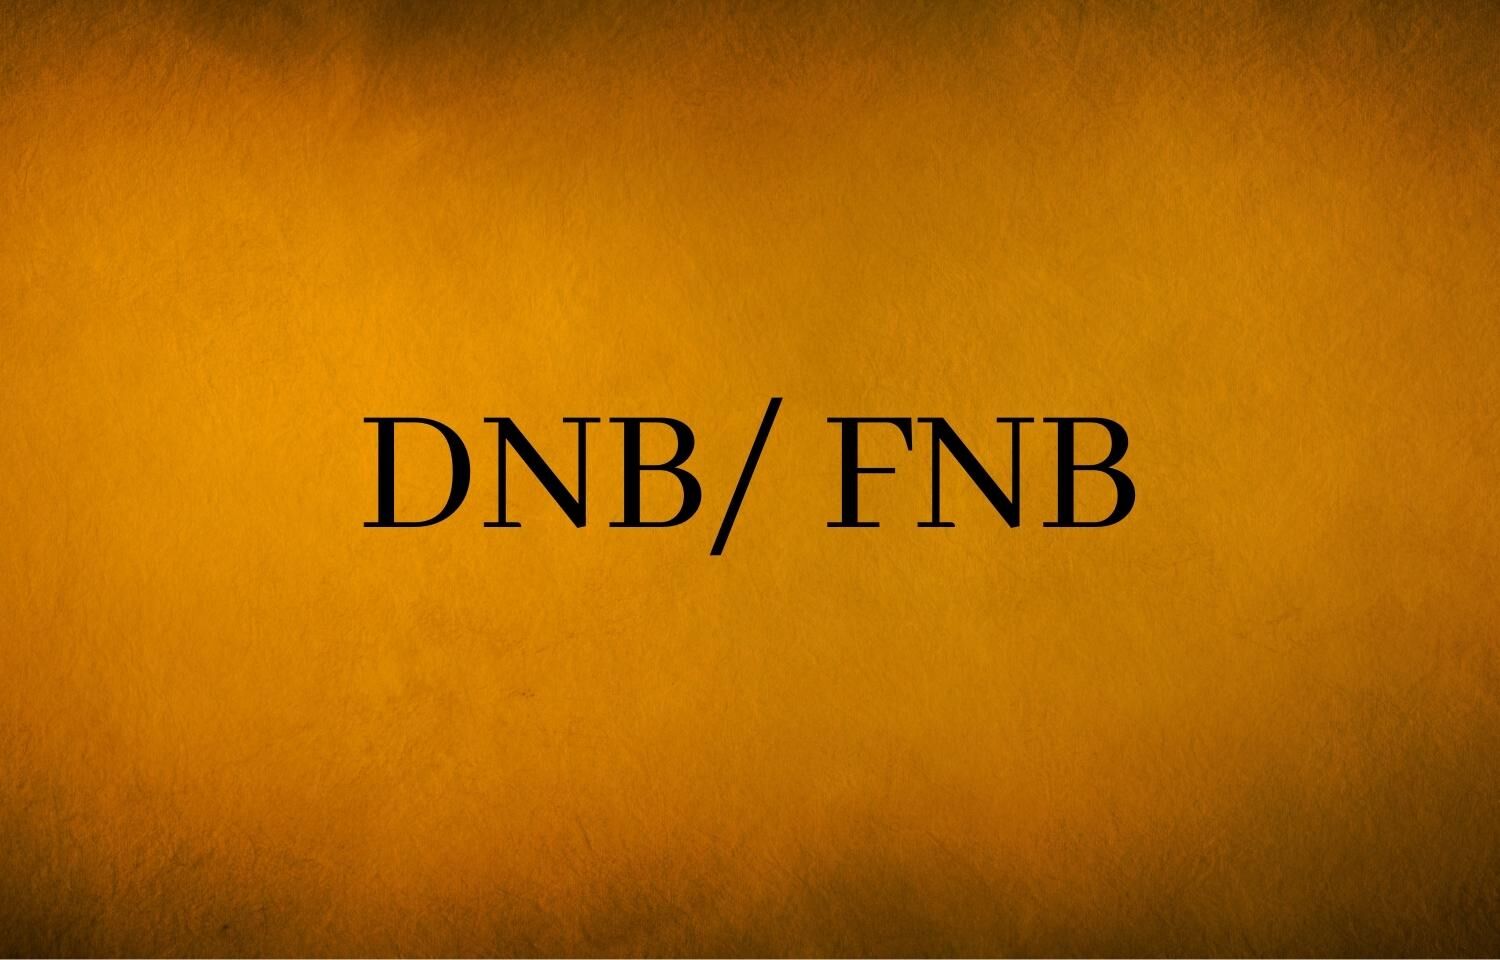 What is FNB and DNB?